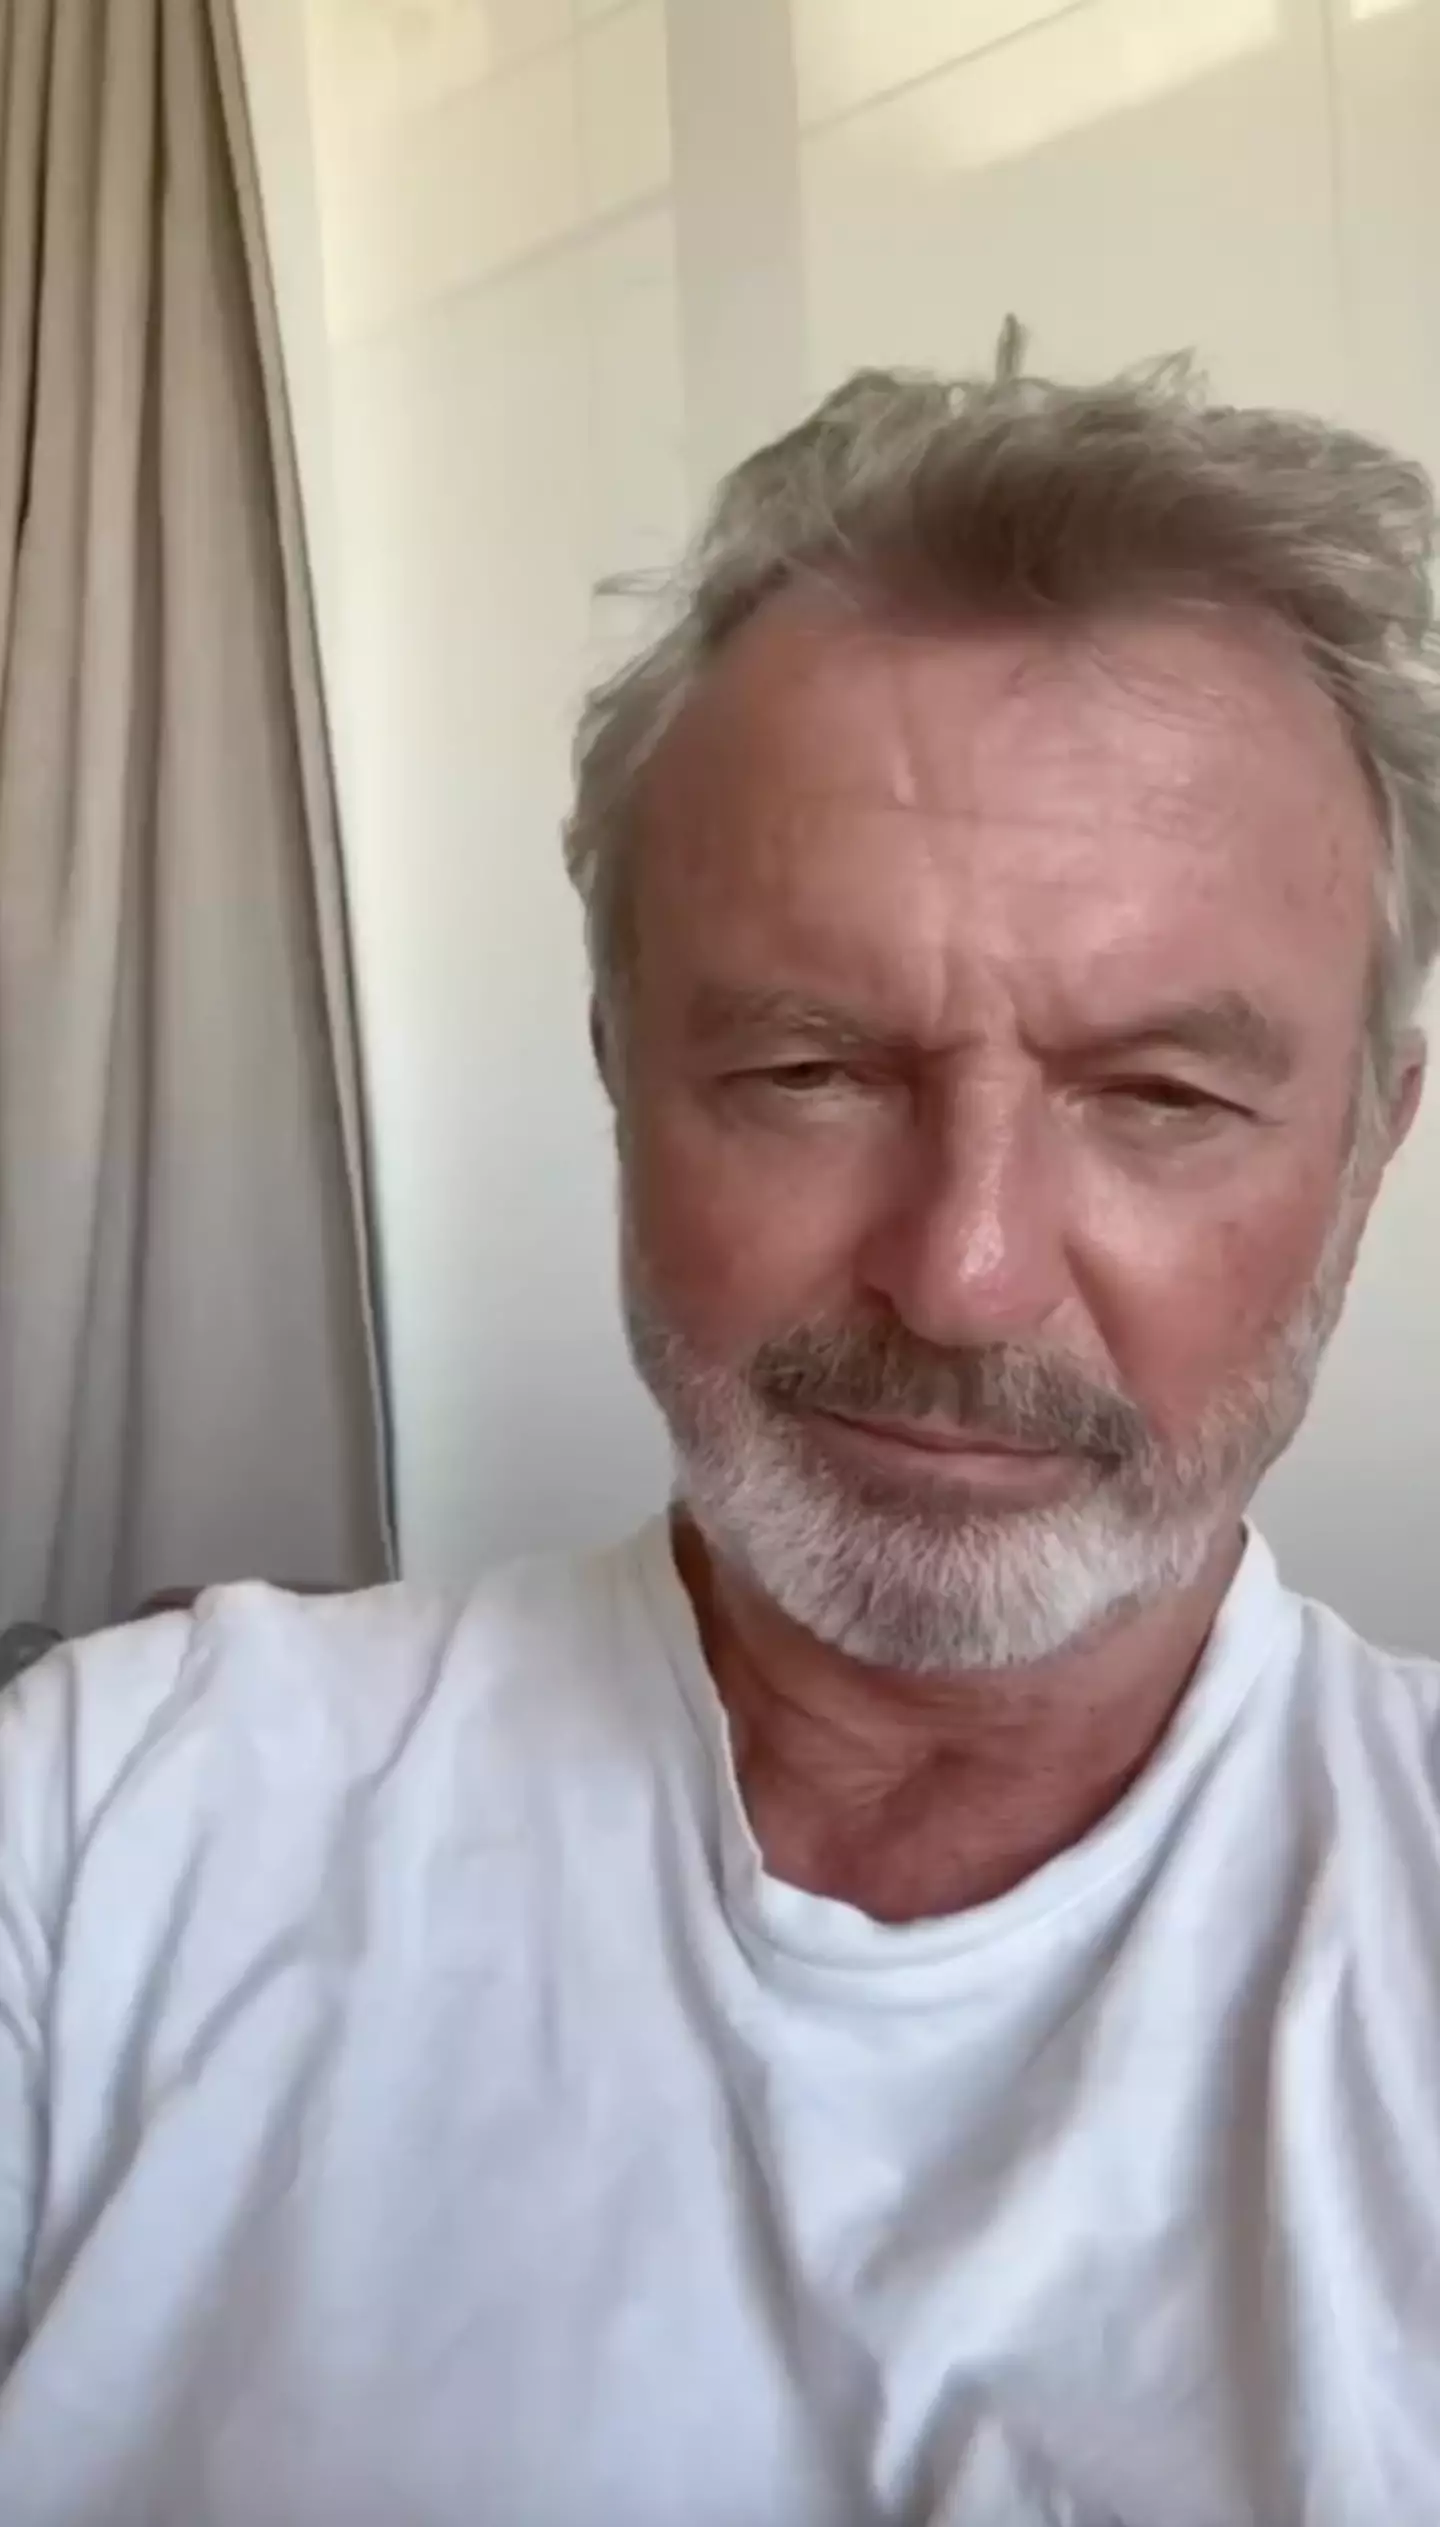 Sam Neill confirmed he's in remission.